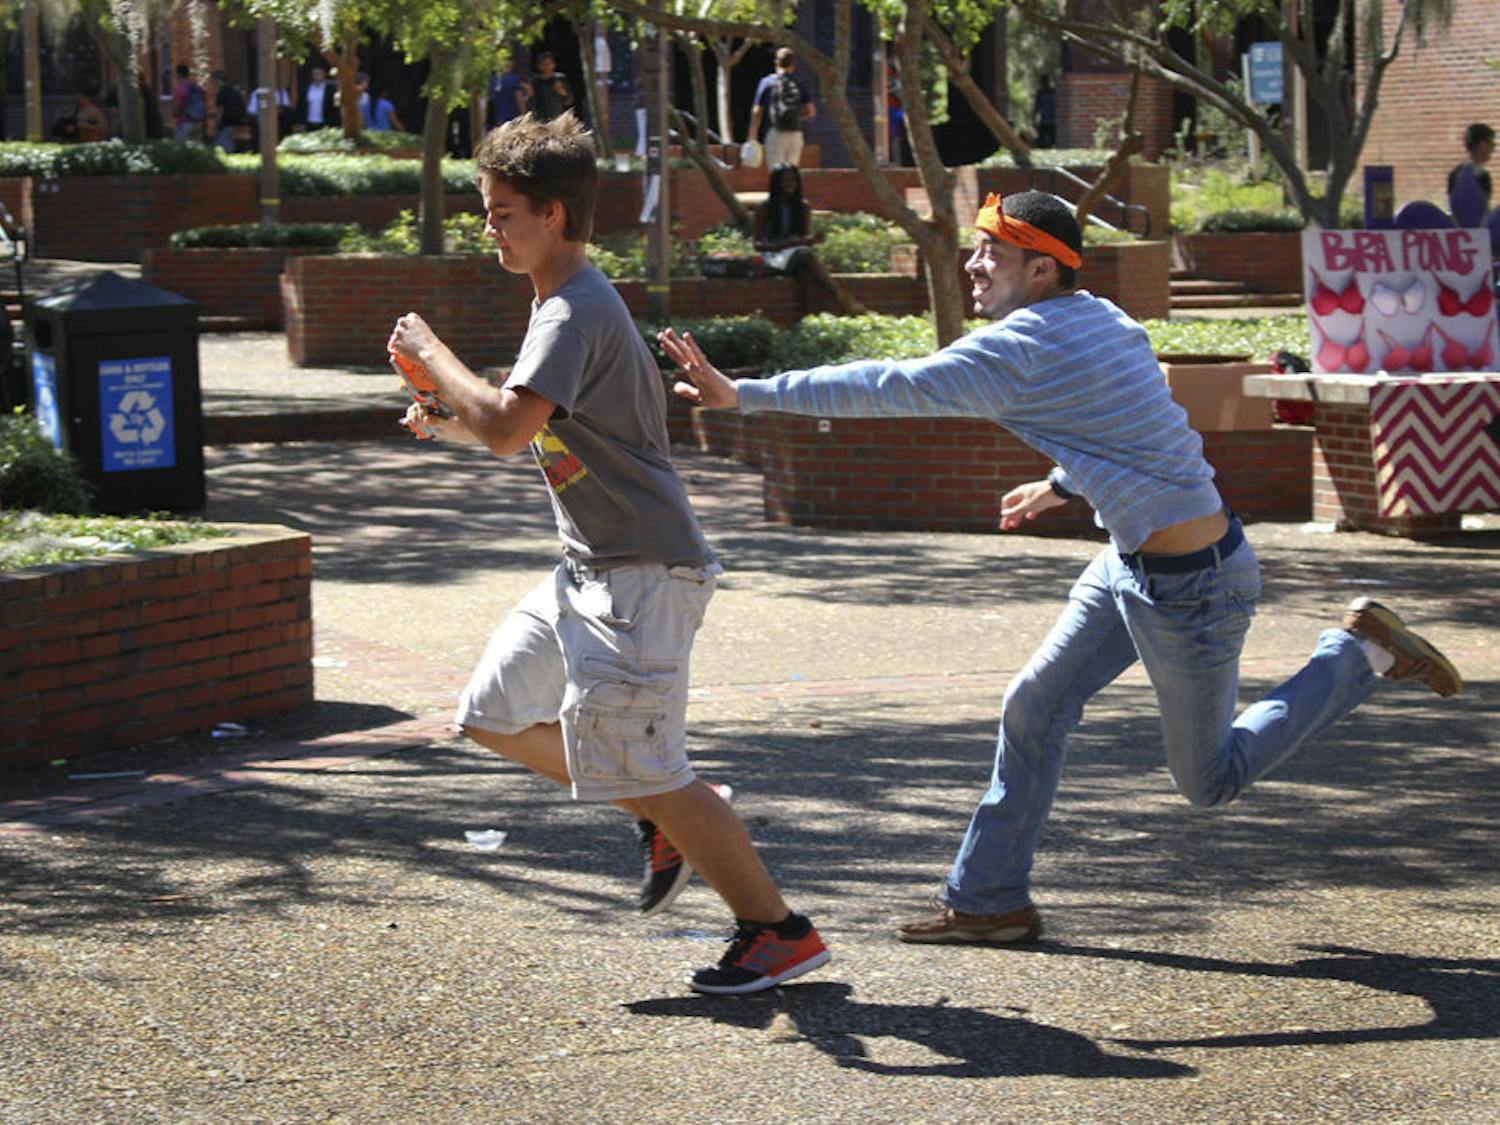 David Ayers chases Maddox Corcoran, a 20-year-old UF economics junior, on Turlington Plaza on Oct. 12, 2015. Gators Humans vs. Zombies began its four-day Summer game on Wednesday.